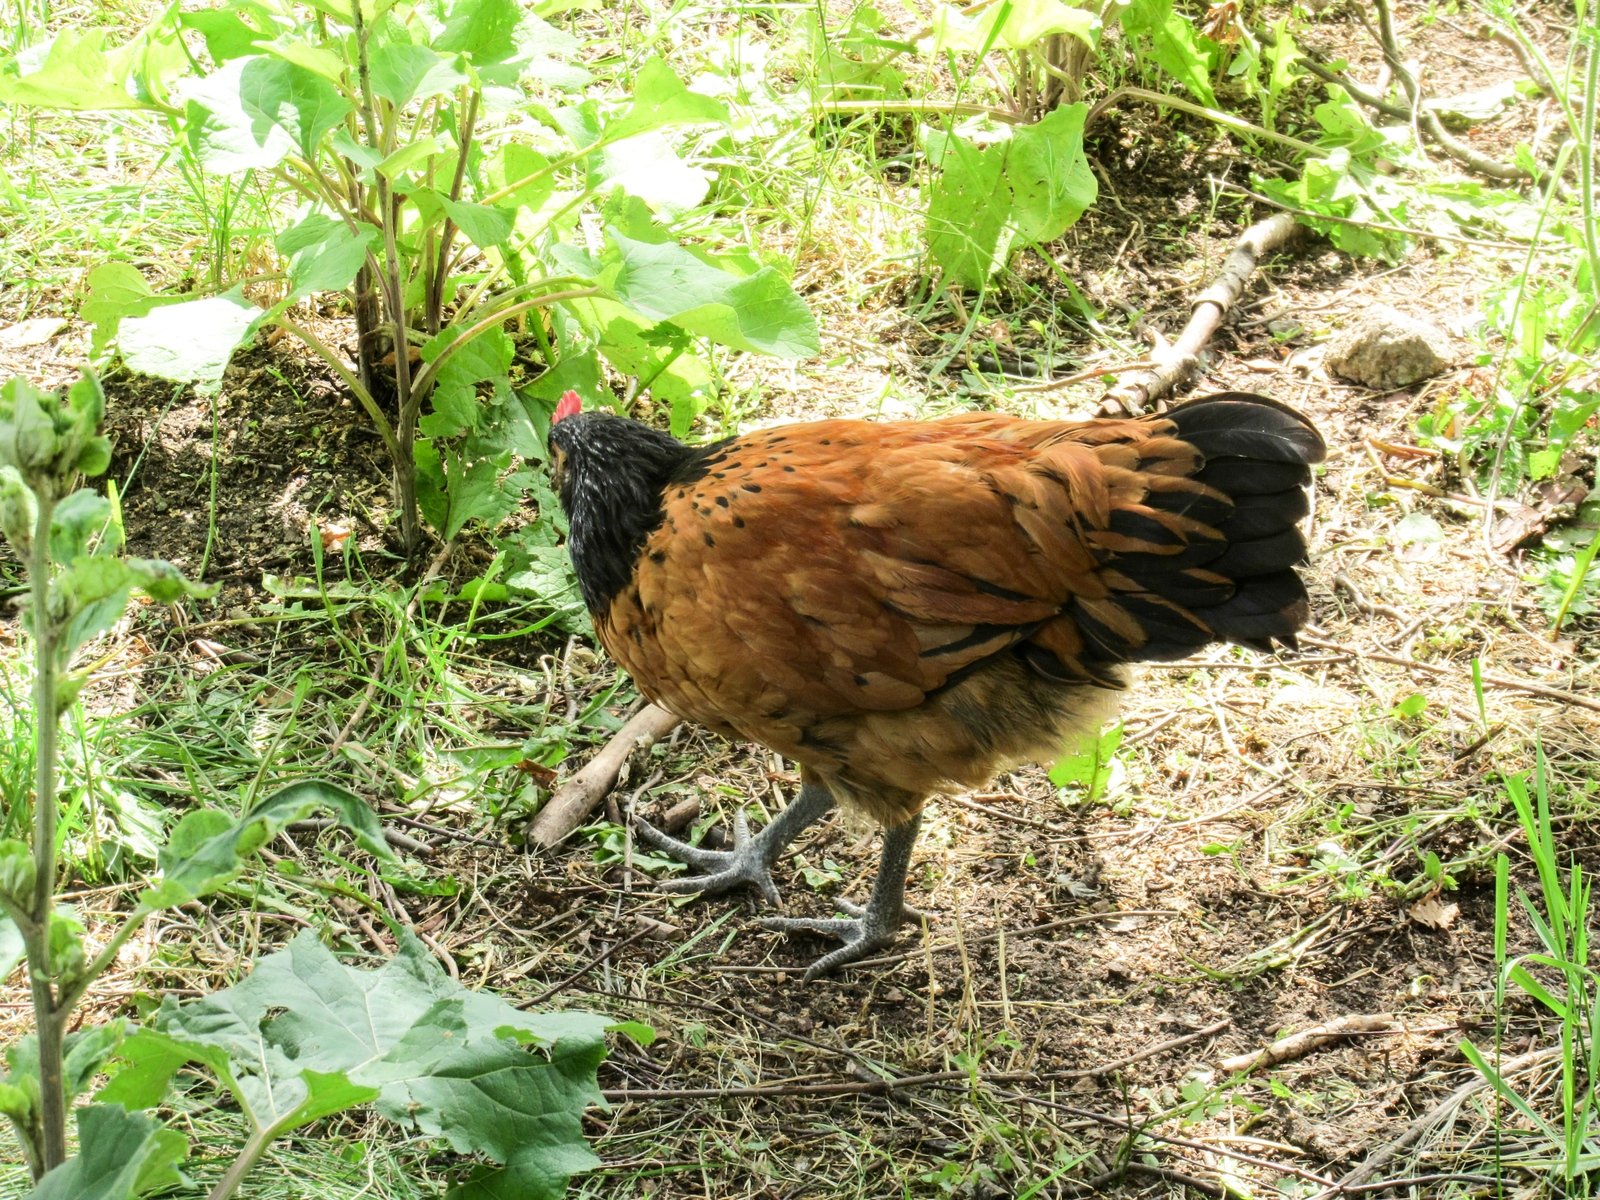 there is a rooster walking through the grass